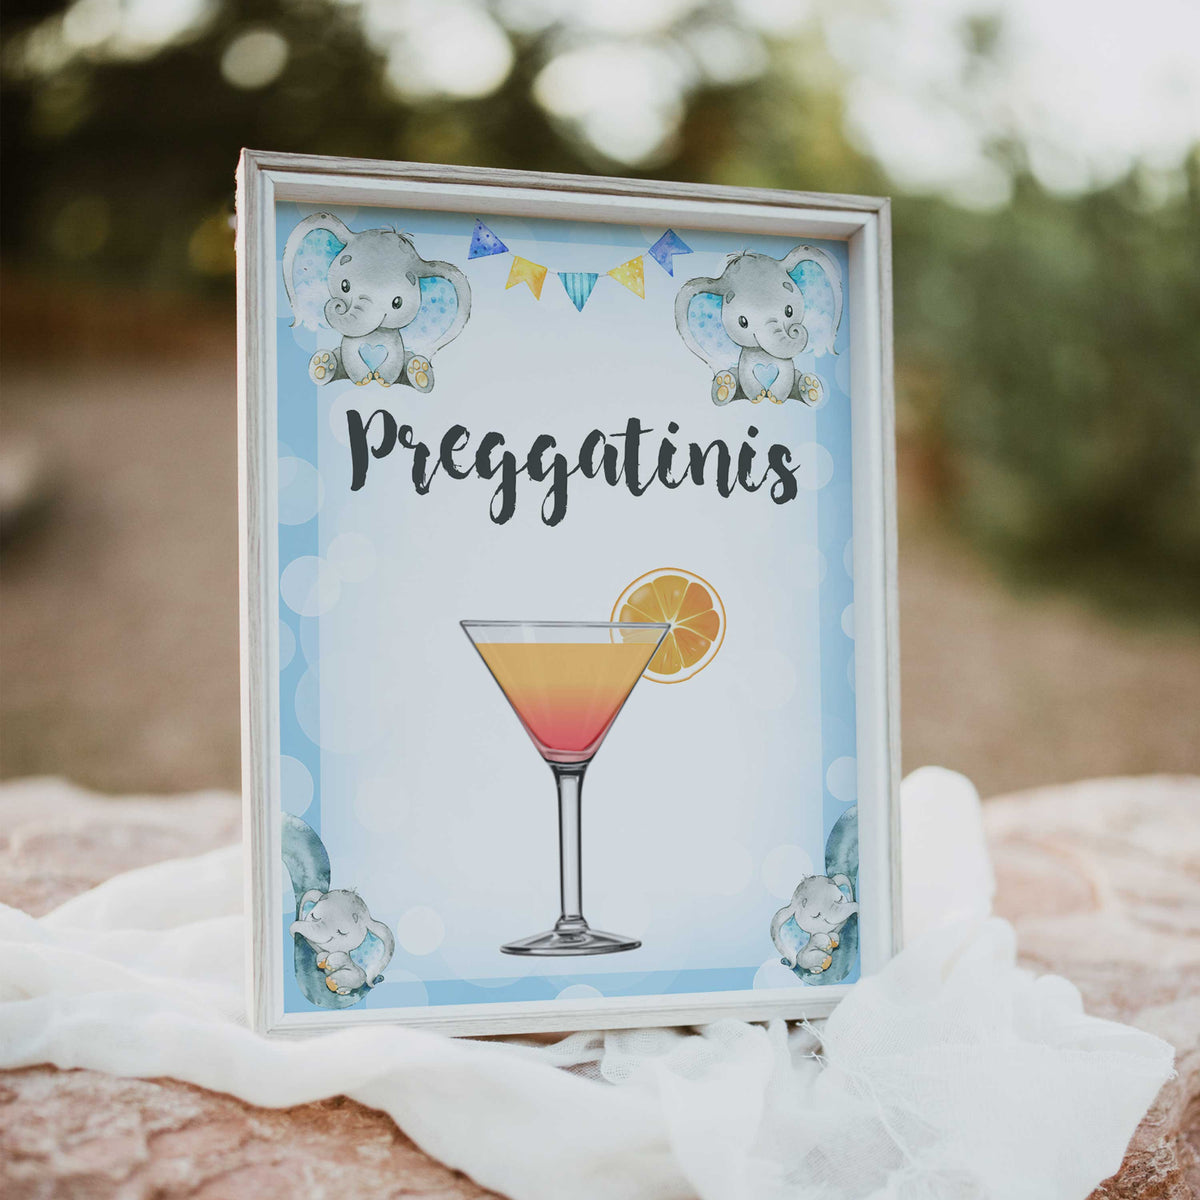 preggatinis baby table signs, Blue elephant baby decor, printable baby table signs, printable baby decor, blue table signs, fun baby signs, fun baby table signs